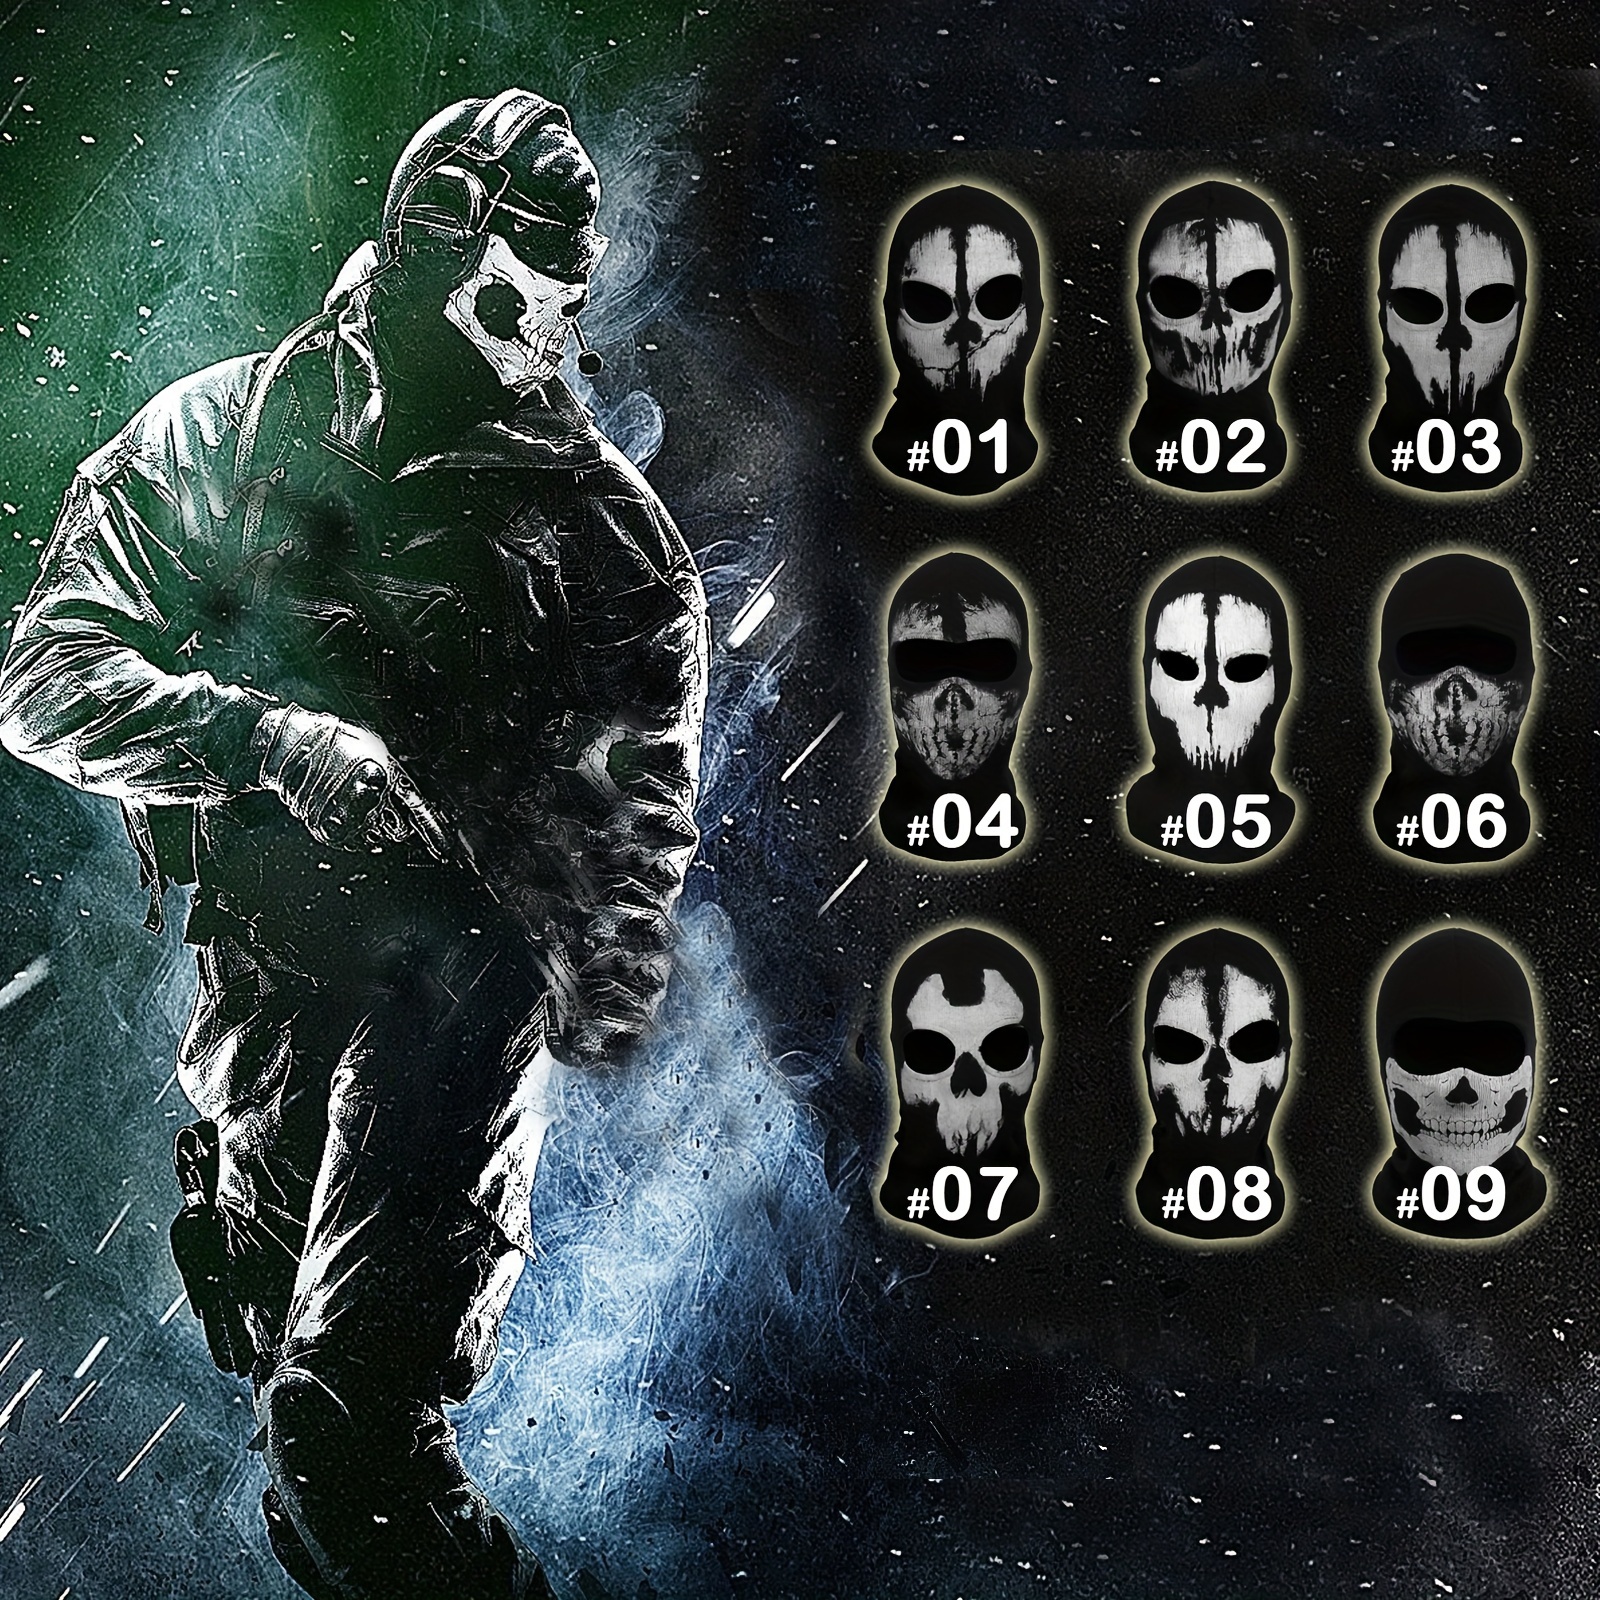 Call Of Duty Ghost Mask Skull Patches, Diy Embroidery Decorative